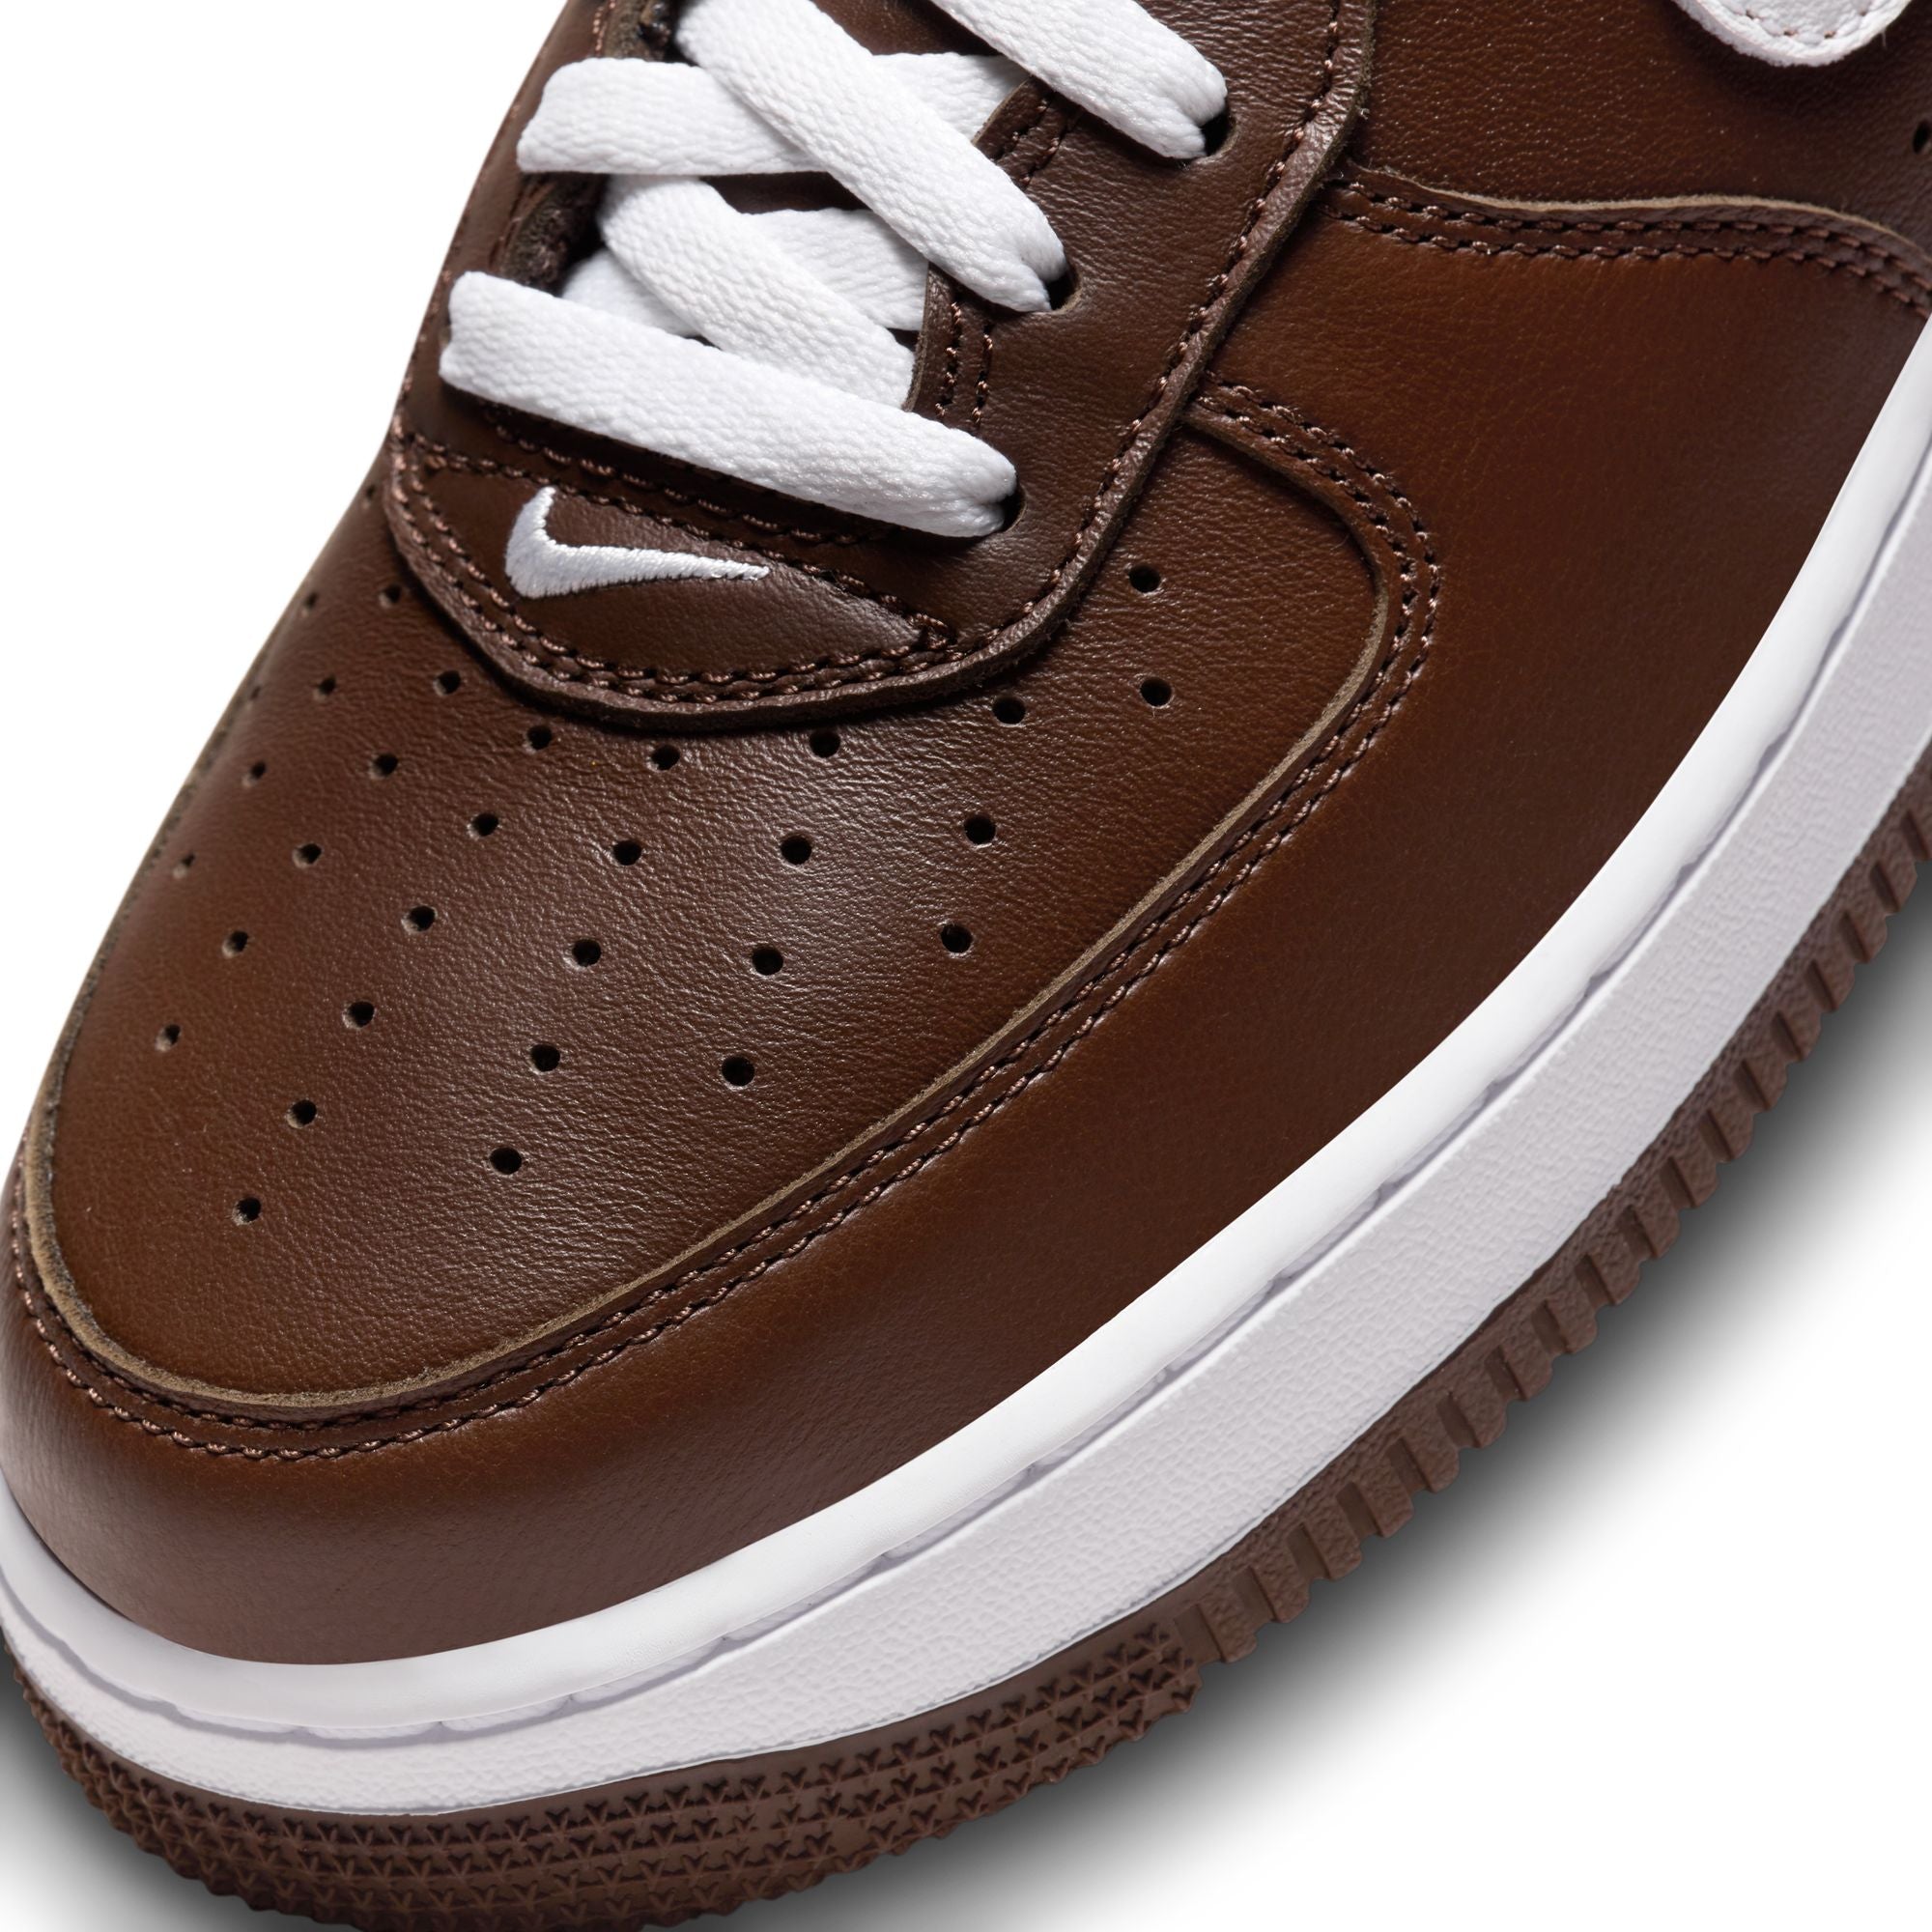 Nike Air Force 1 Low Retro QS - FD7039-200 Chocolate/White – Stomping Ground